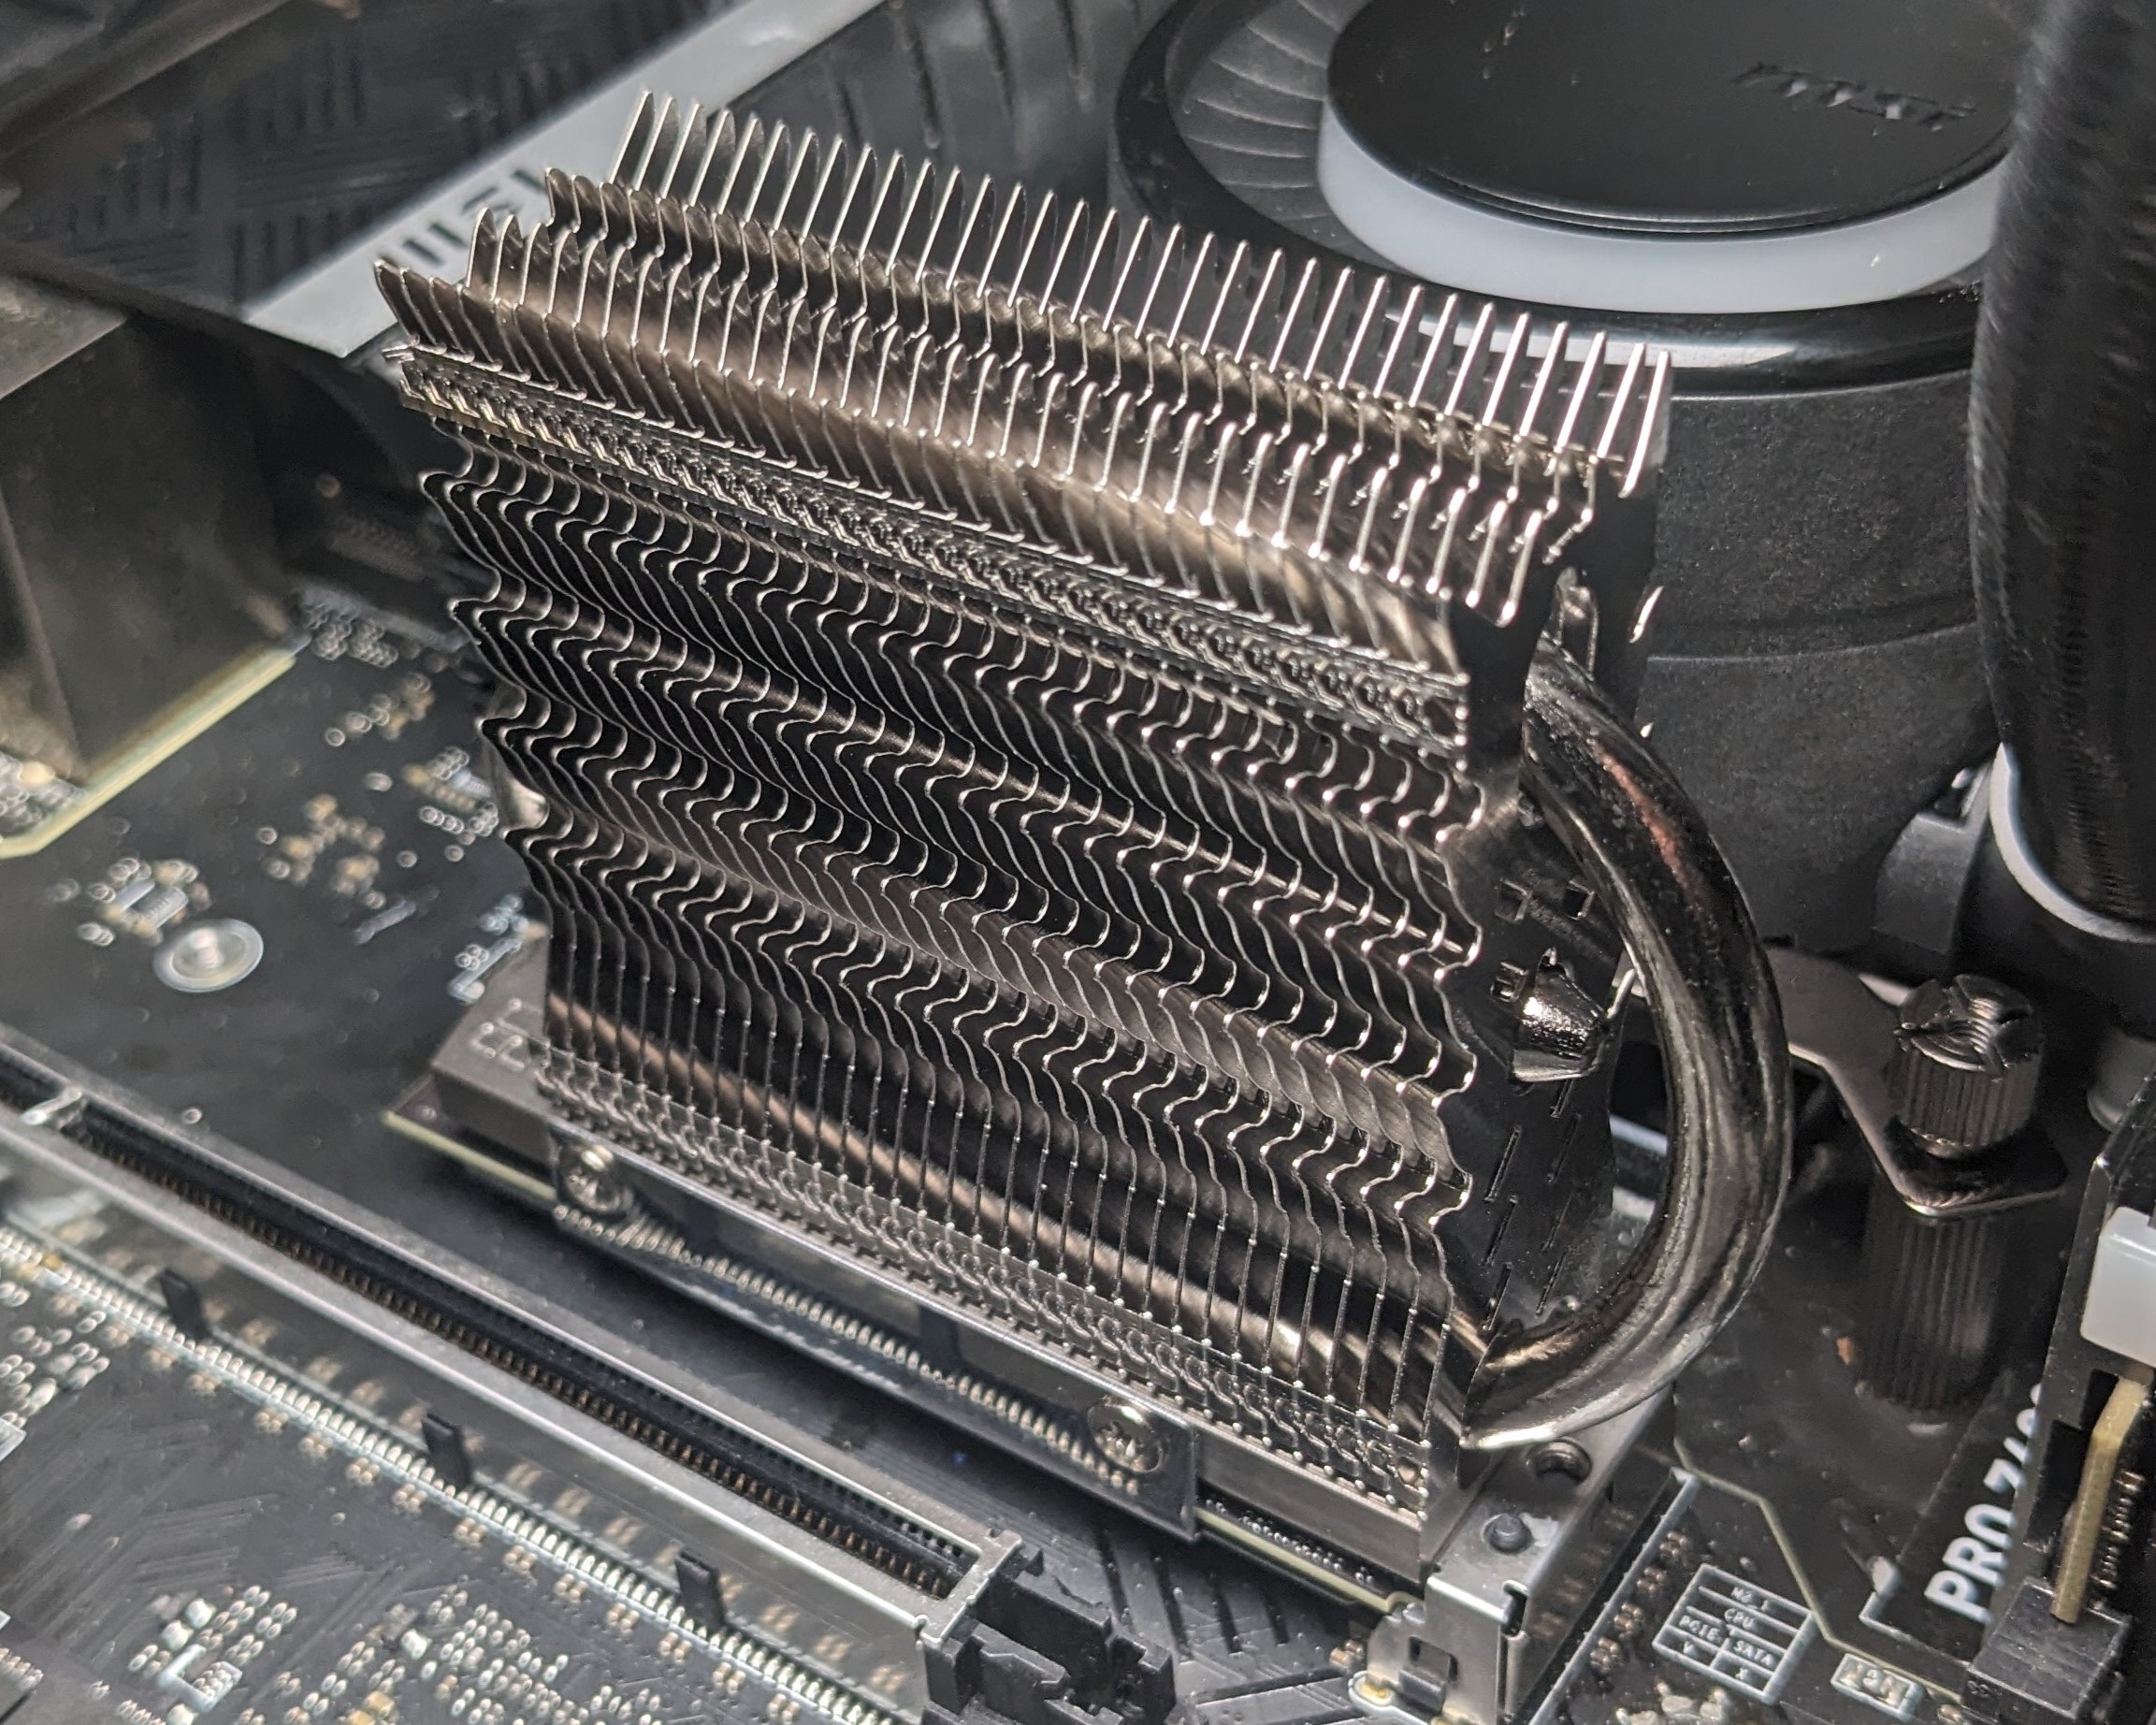 Thermalright HR-09 2280 Pro SSD Heatsink Cooler Review: Dominating over the competition